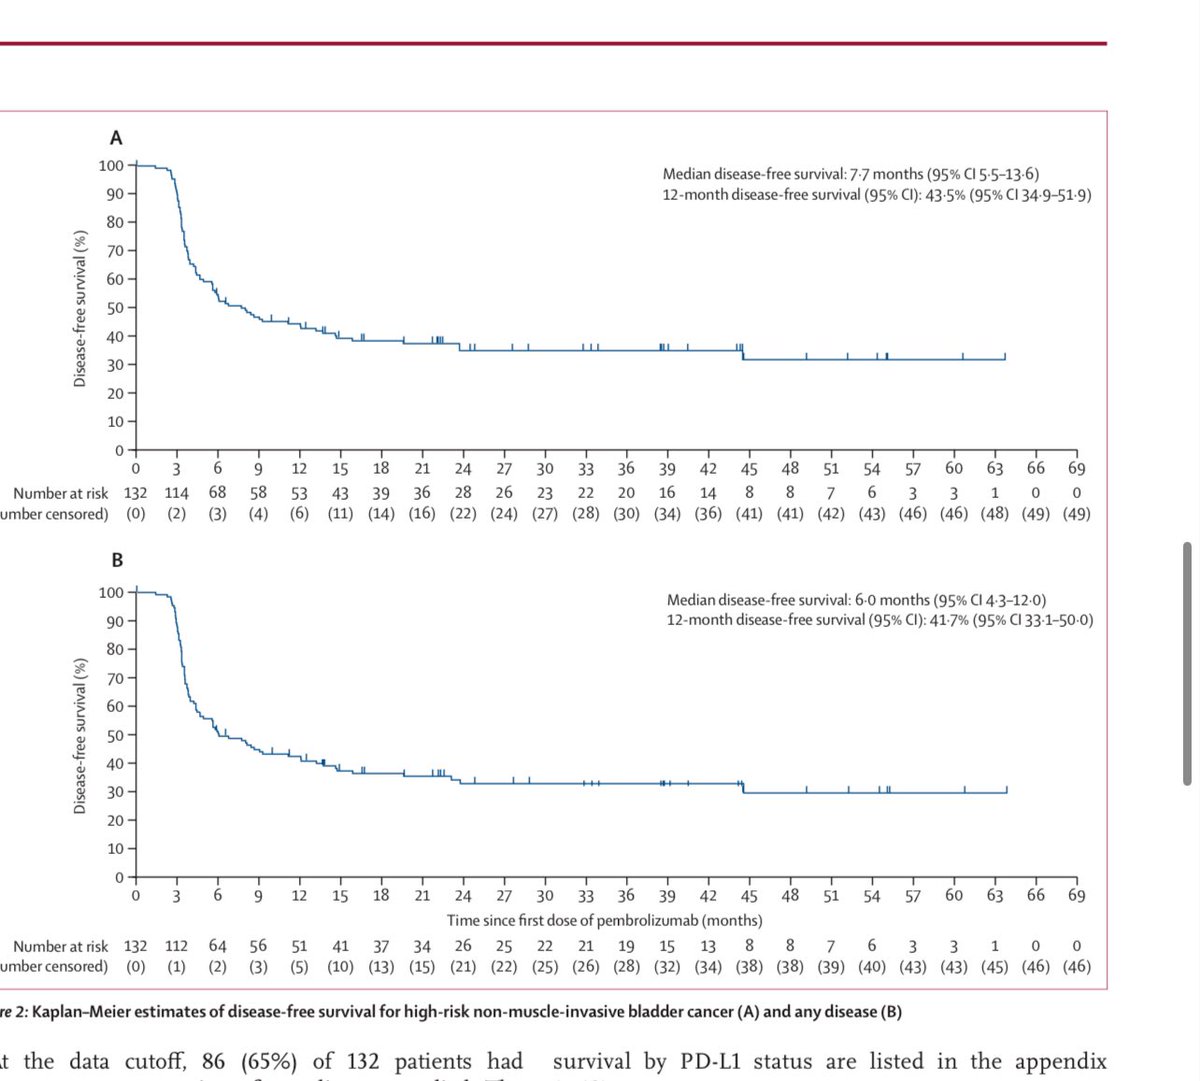 KEYNOTE-057 trial: Pembrolizumab for BCG-unresponsive w/o CIS NMIBC ➡️12-month DFS 43.5%, 2-year DFS 34.9%. Treatment-related AE 73% (14% grade 3/4), 11% discontinued due to AEs. Incredible effort by team for their enduring efforts! #BladderCancer #ClinicalTrial #CancerResearch